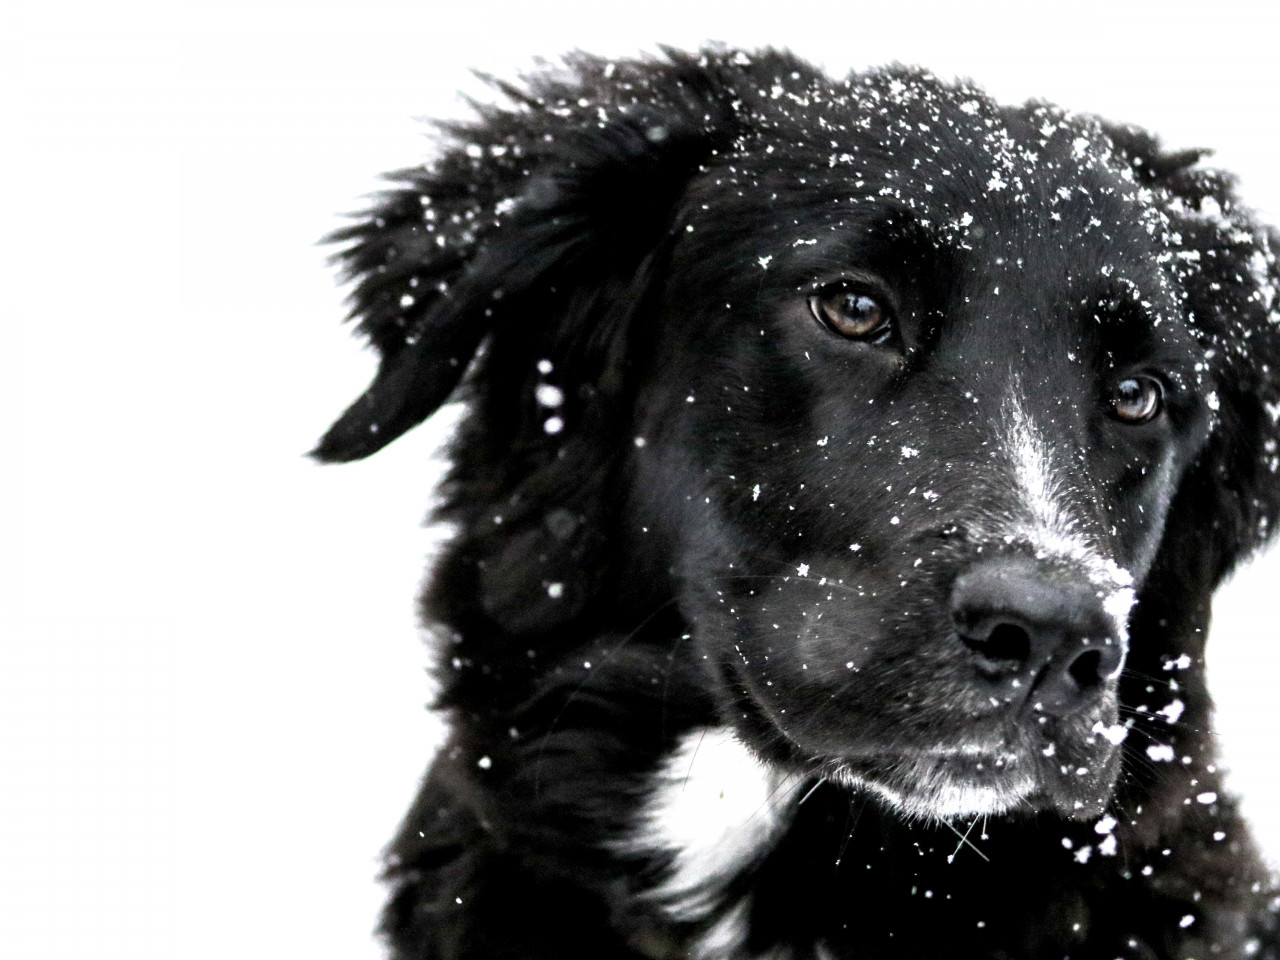 Snowing over the cute dog wallpaper 1280x960